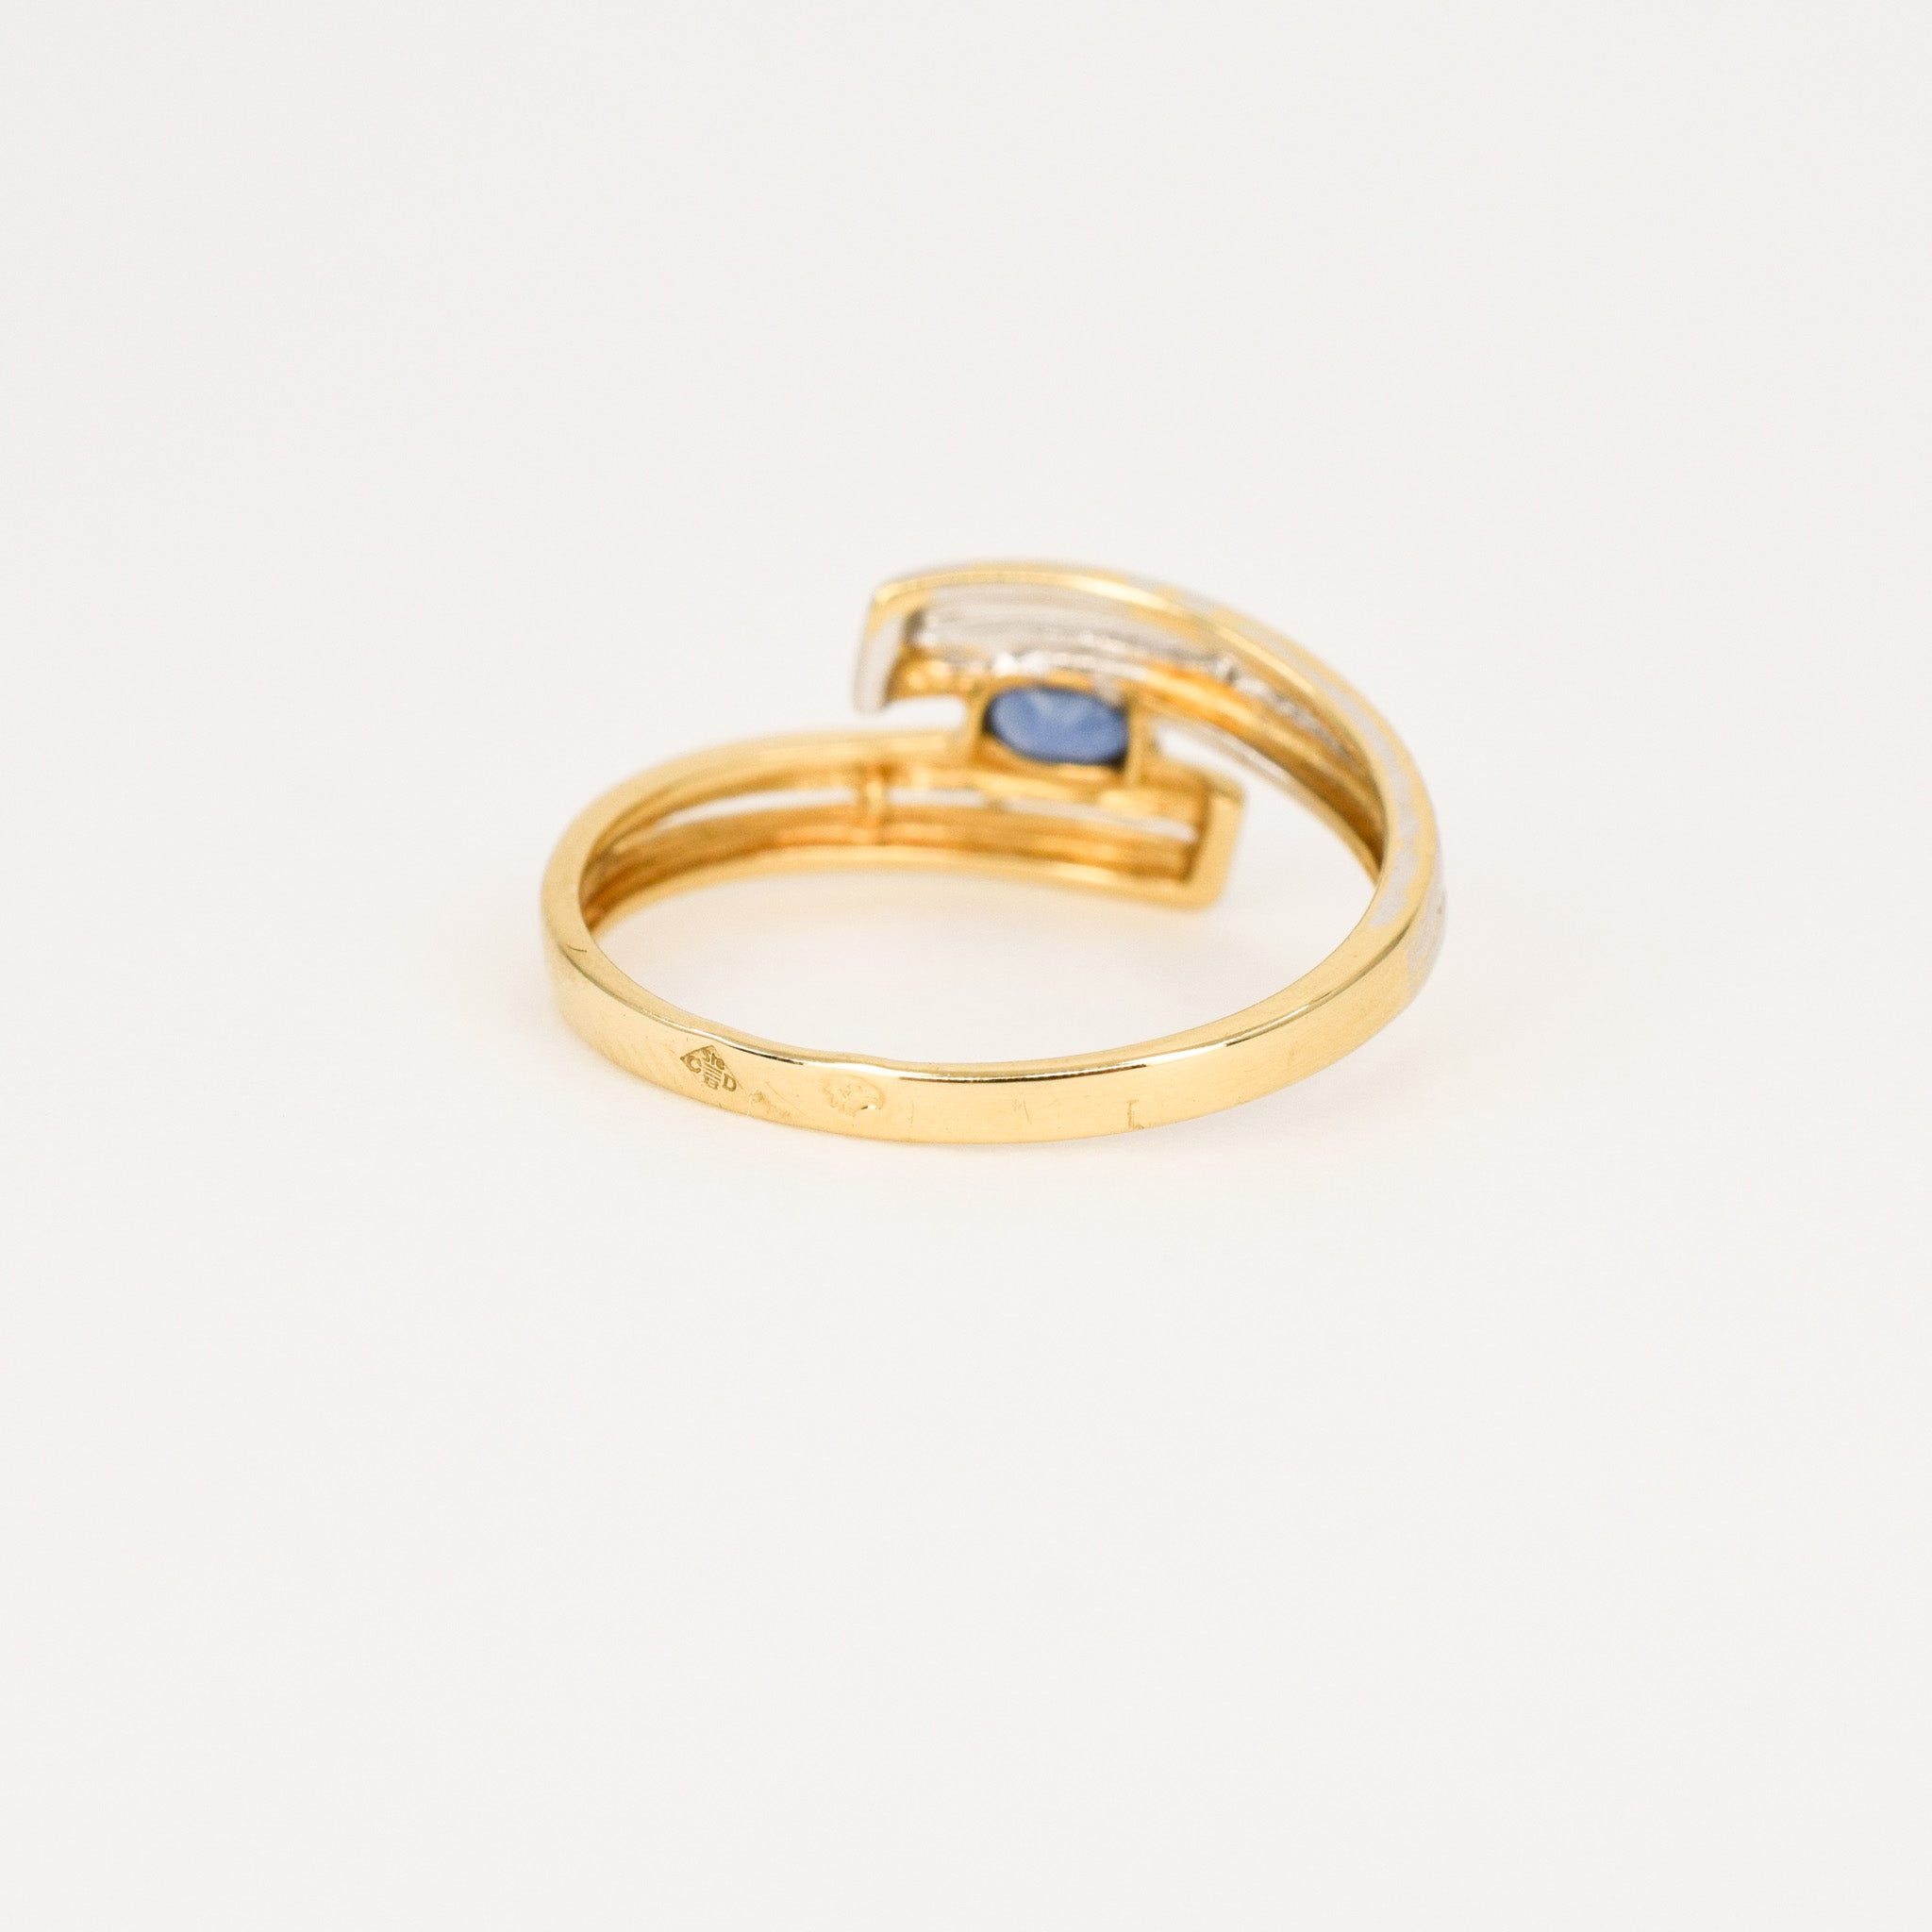 vintage sapphire bypass ring, folklor vintage jewelry canada